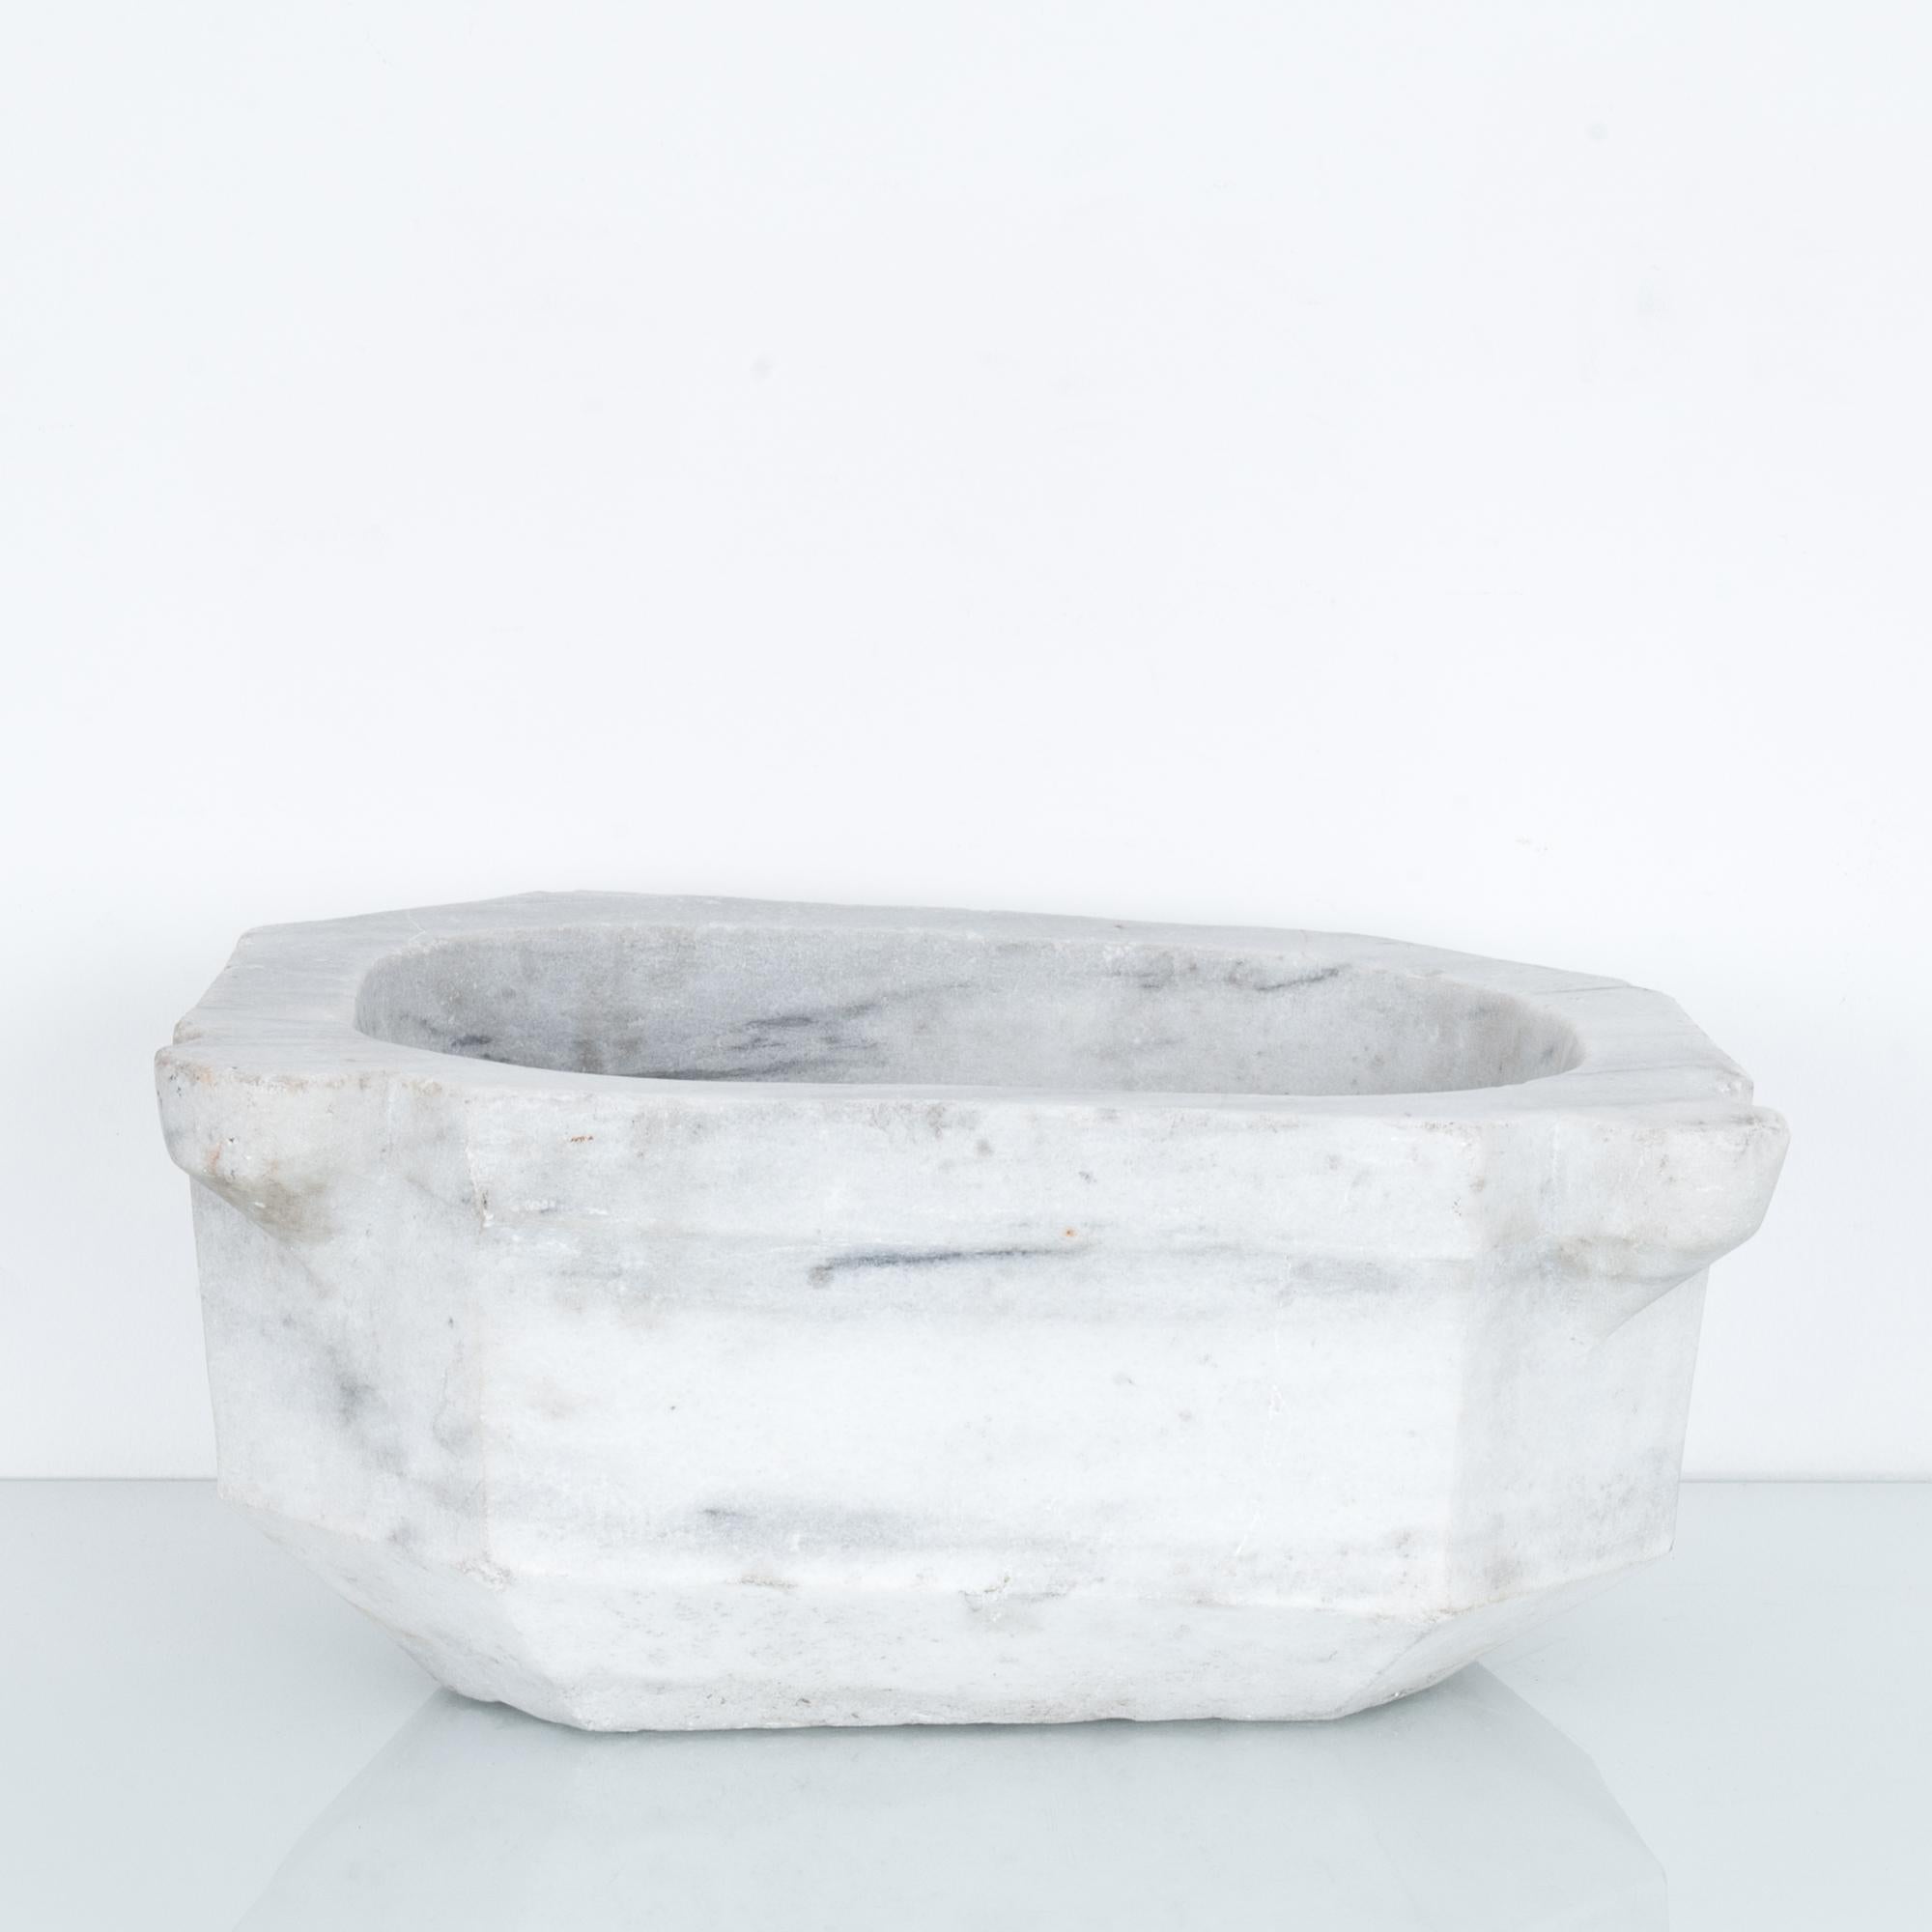 A stone architectural element, used formerly as a font or stoup. Found in ecclesiastical architecture, this basin for water would be placed at the entrance to a church. Rendered in cloudy grey marble, with a rustic textured finish, this stone object